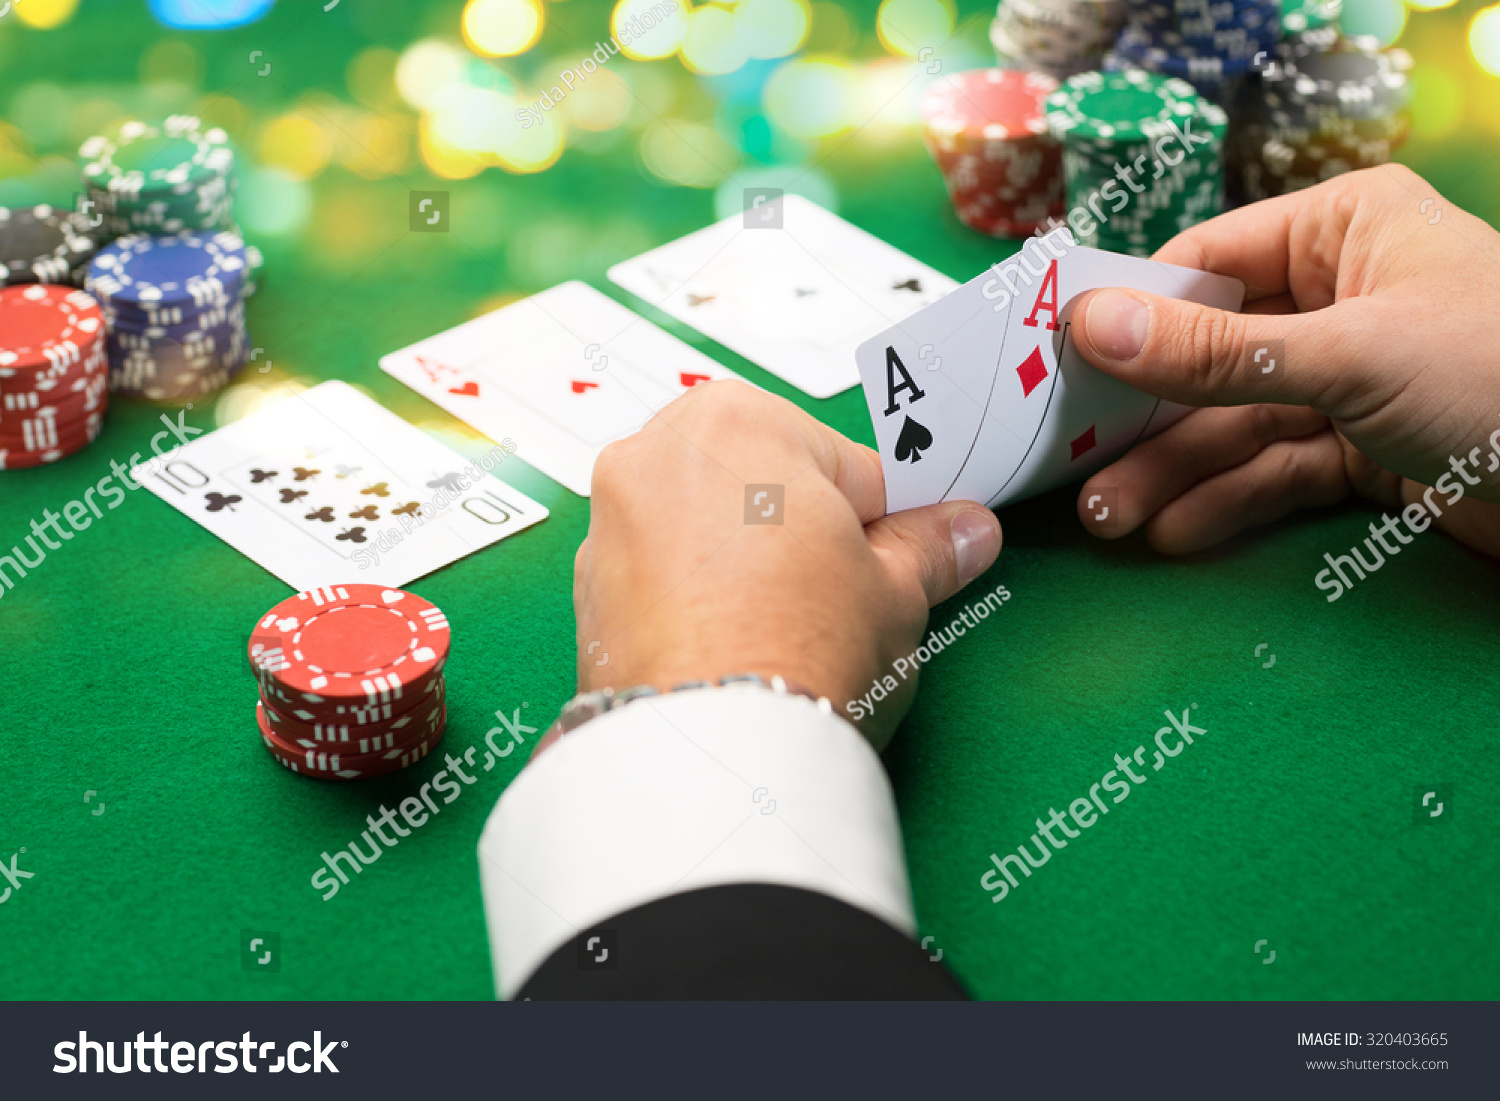 casino, gambling, poker, people and entertainment concept - close up of poker player with playing cards and chips at green casino table over holidays lights background #320403665